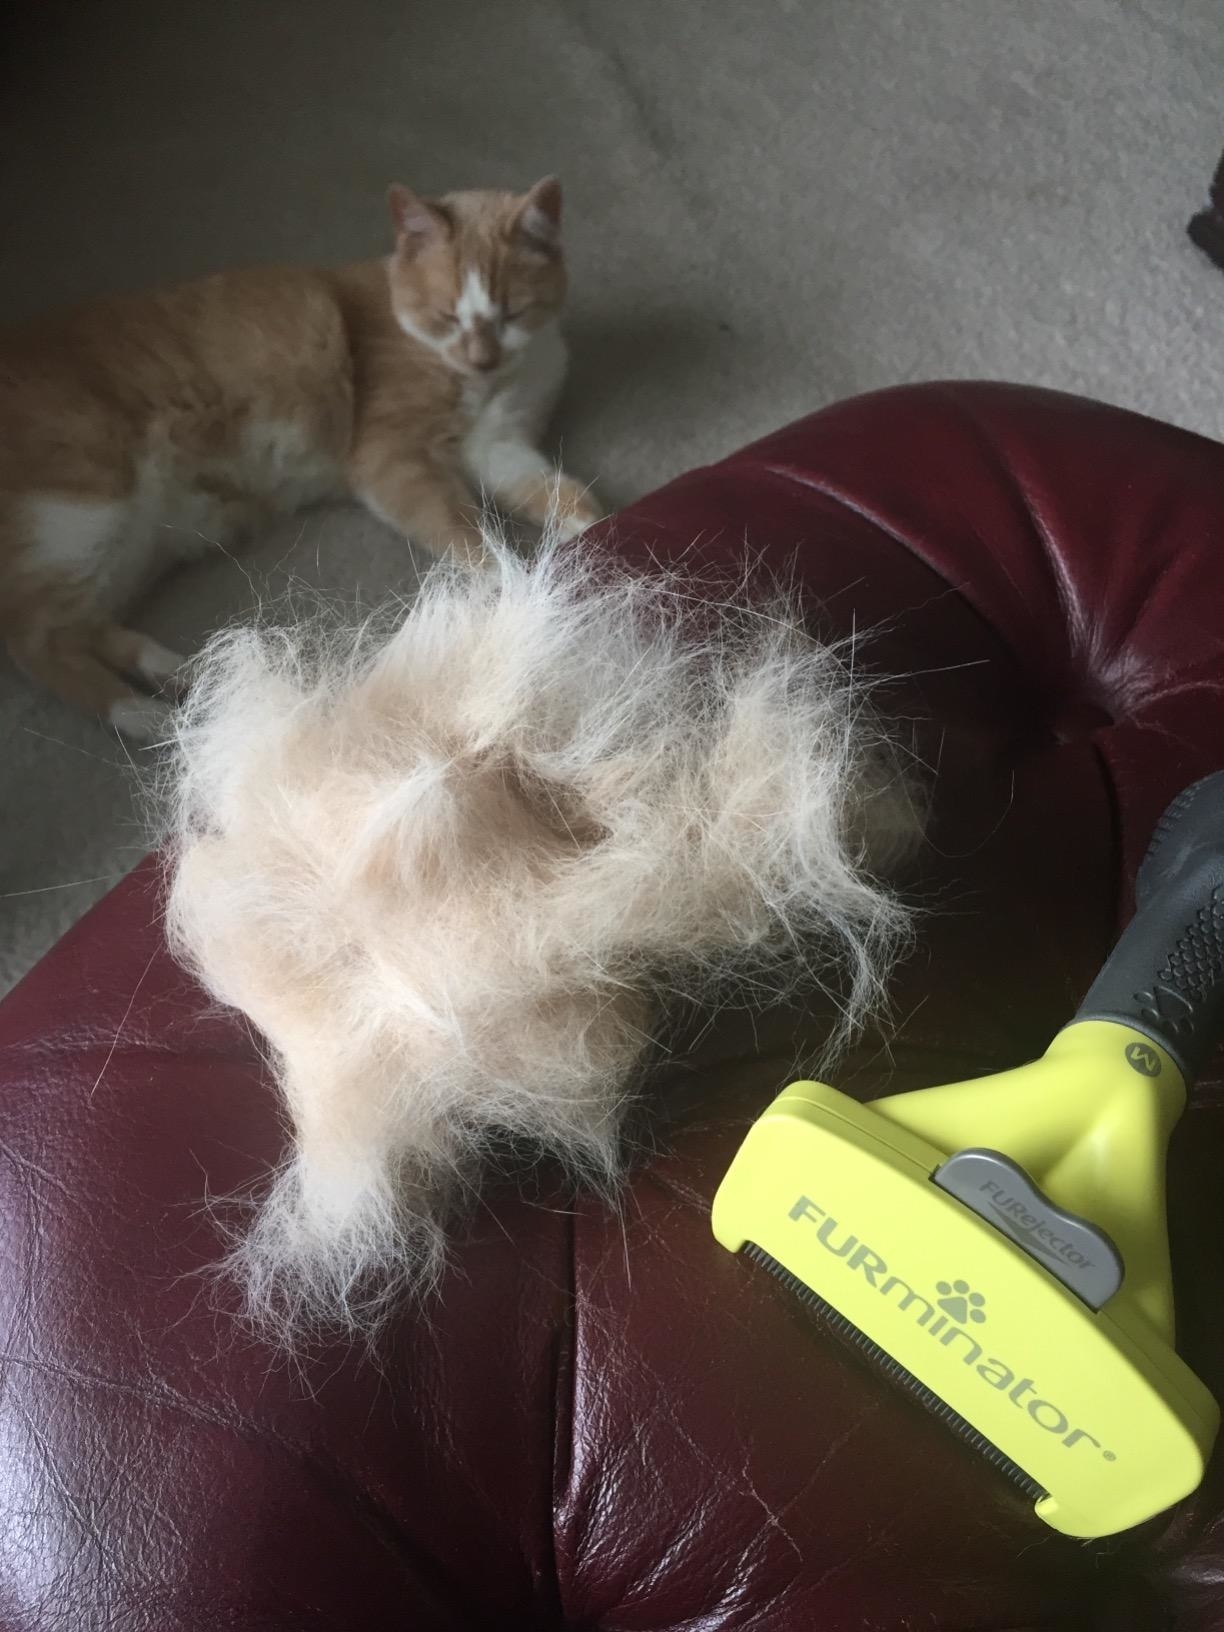 A huge pile of fur next to the brush